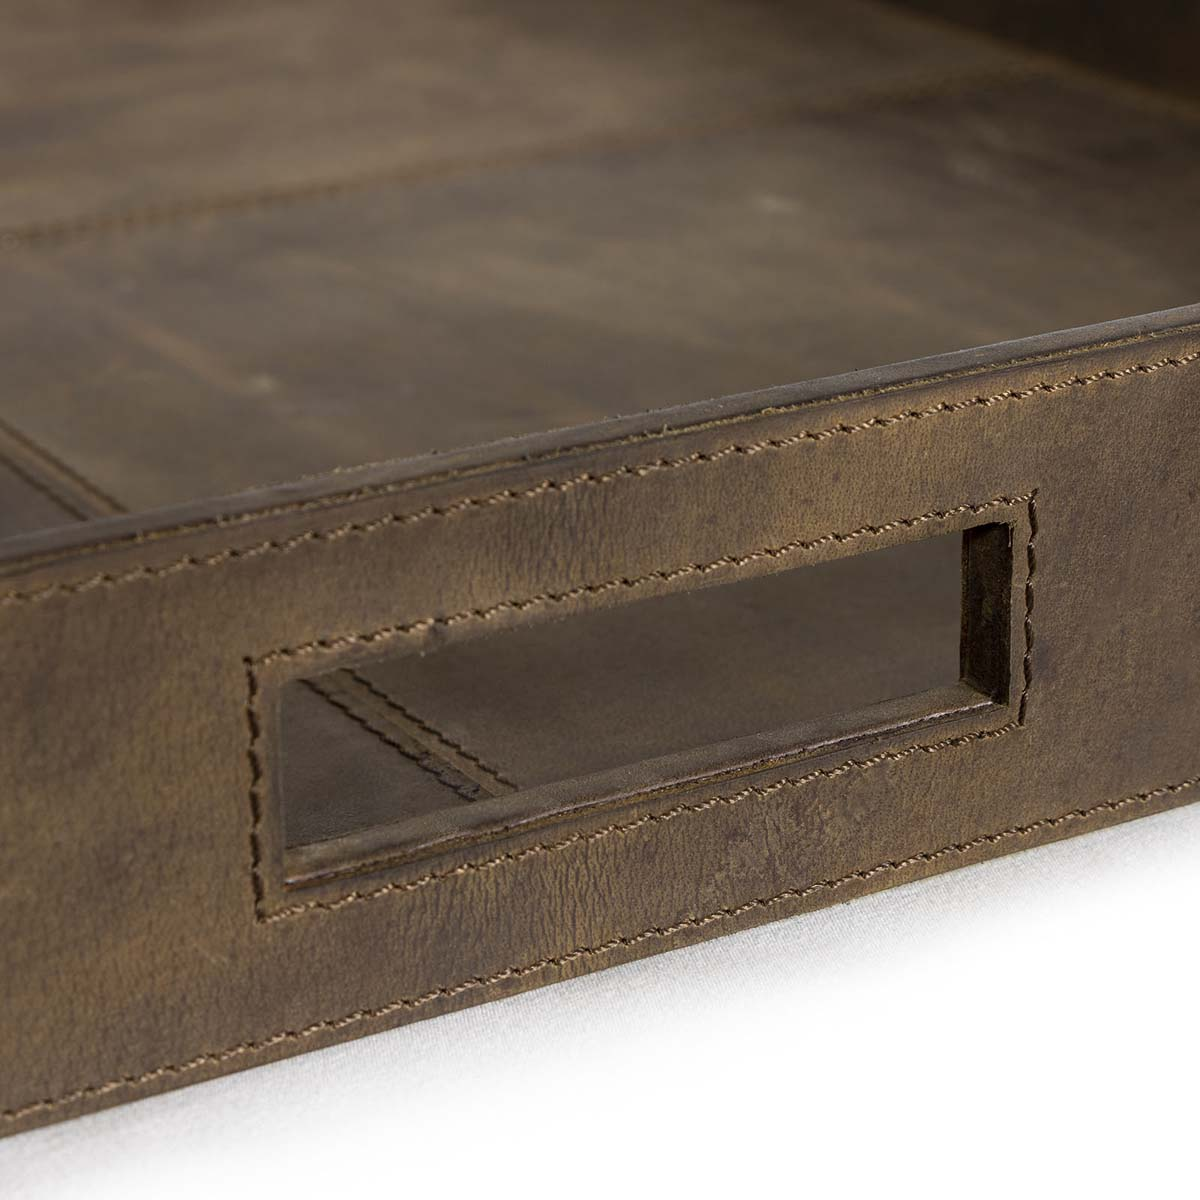 Regina Andrew Derby Square Leather Tray